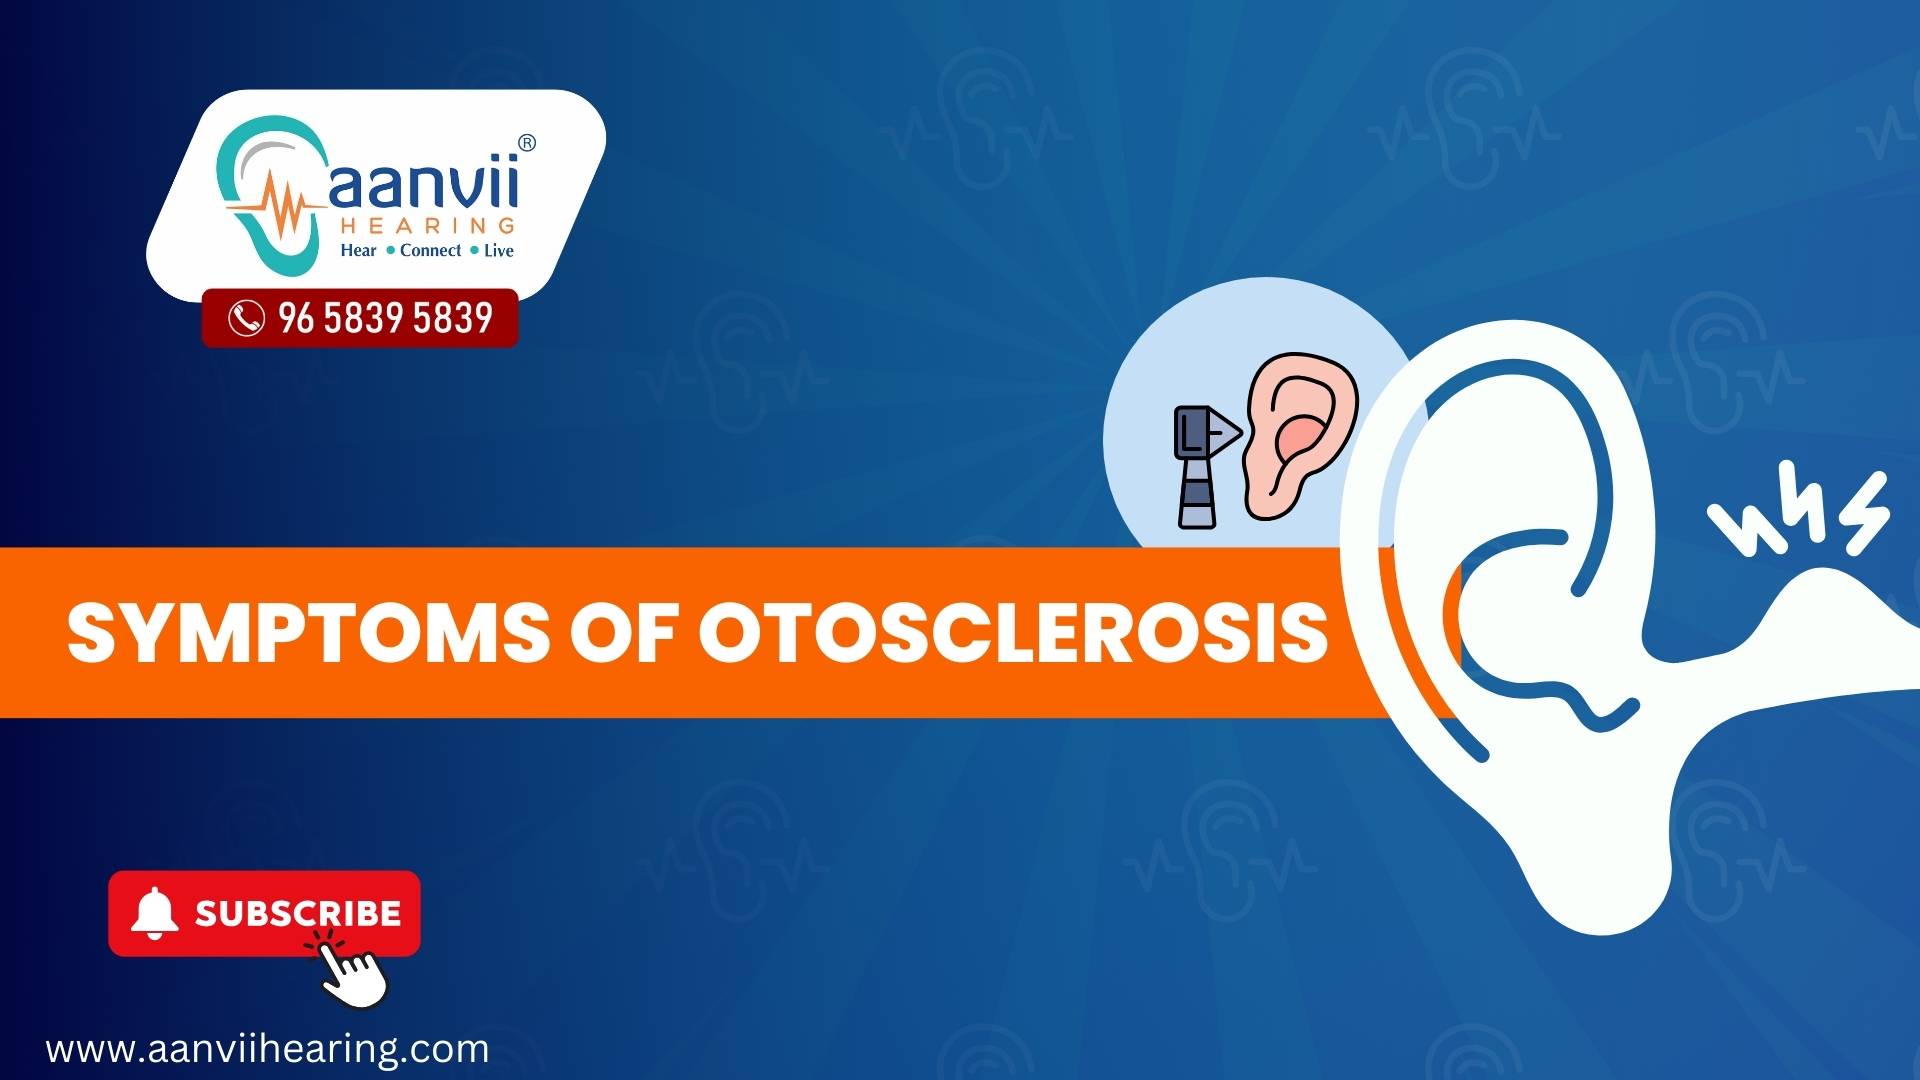 What Are the Symptoms of Otosclerosis? | Aanvii Hearing